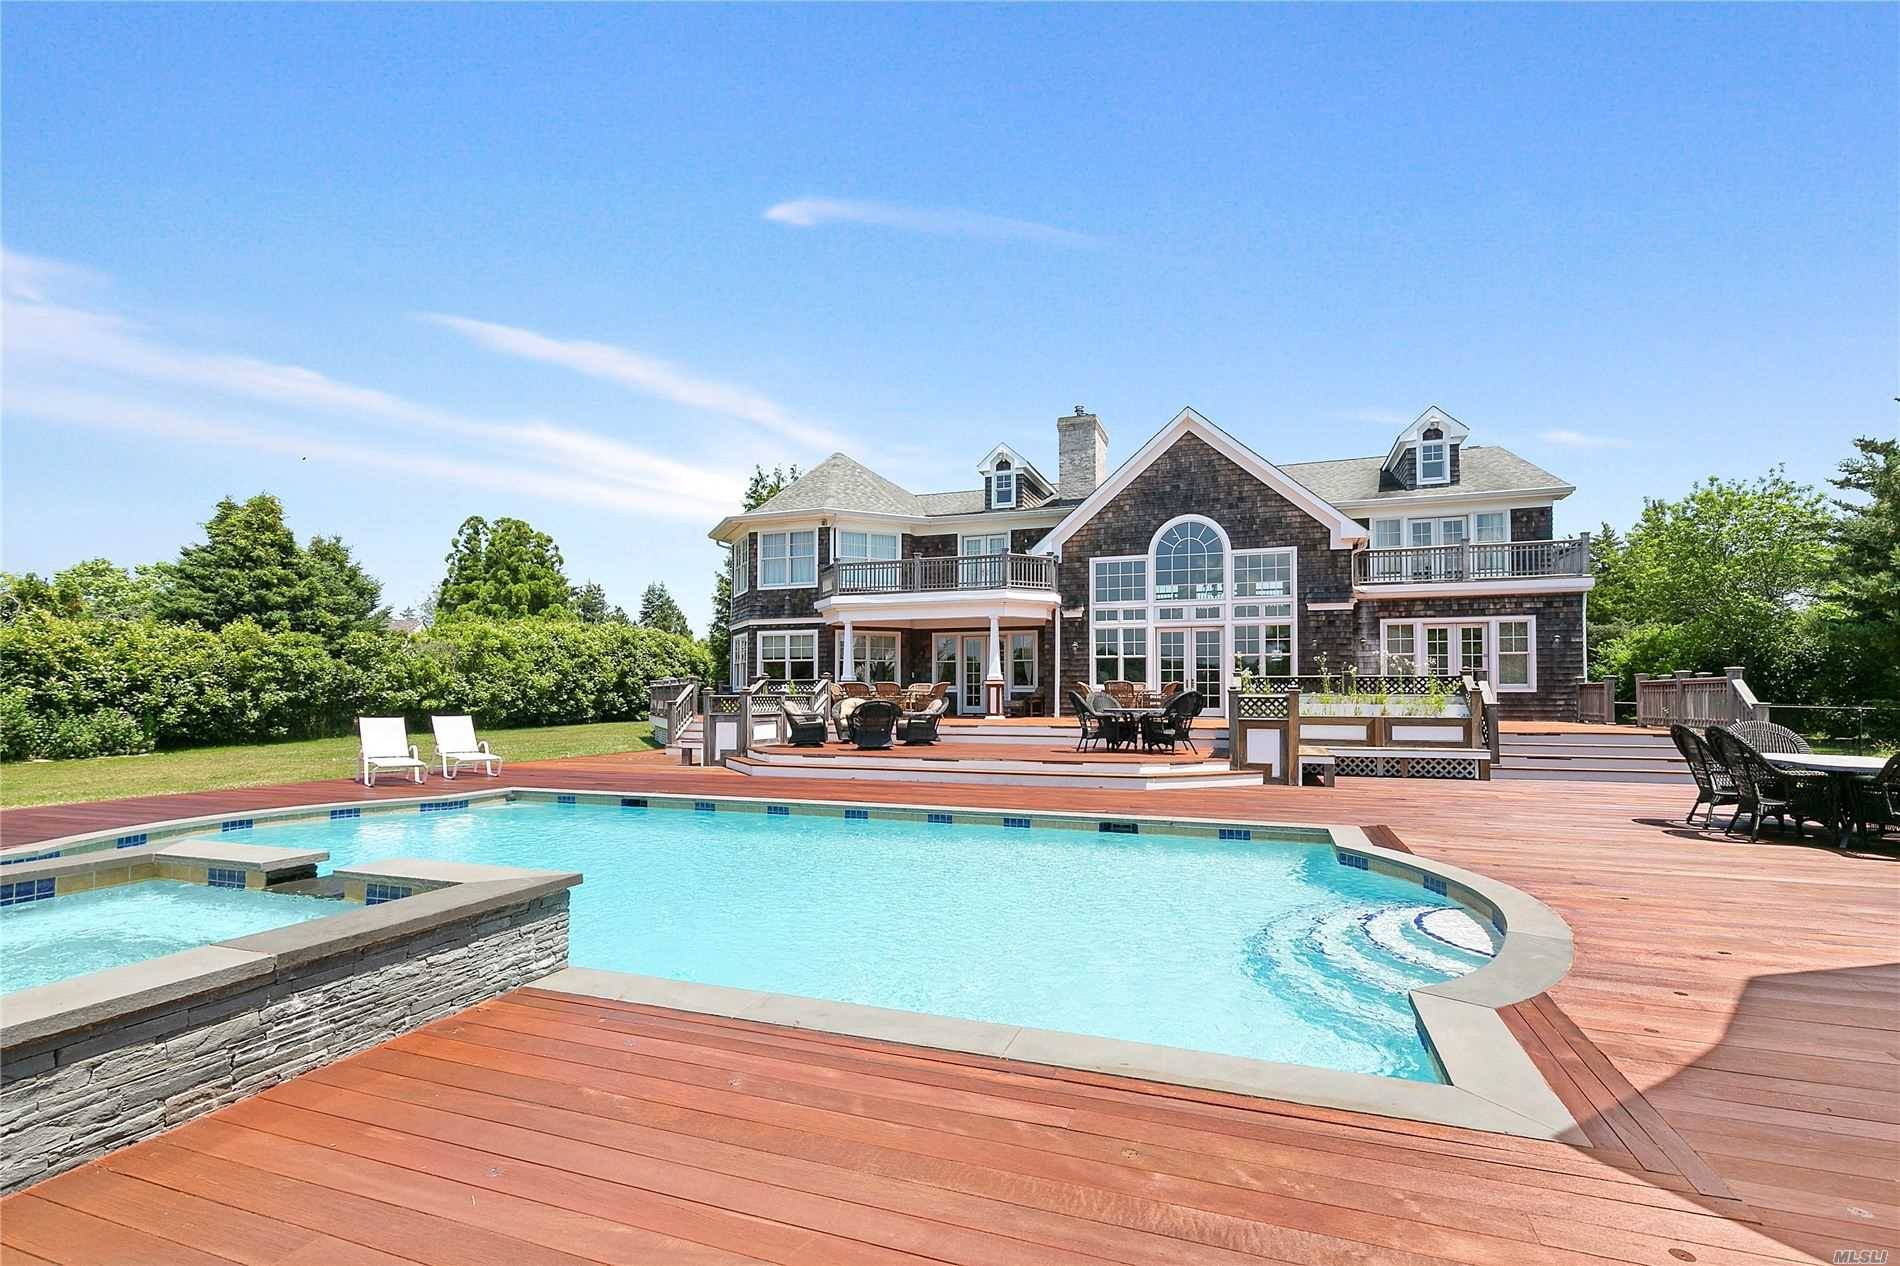 NEW Exclusive ! 5 Pine Tree Lane, an expansive 8000 sq ft waterfront home with dock, pool and pool house situated on 1.